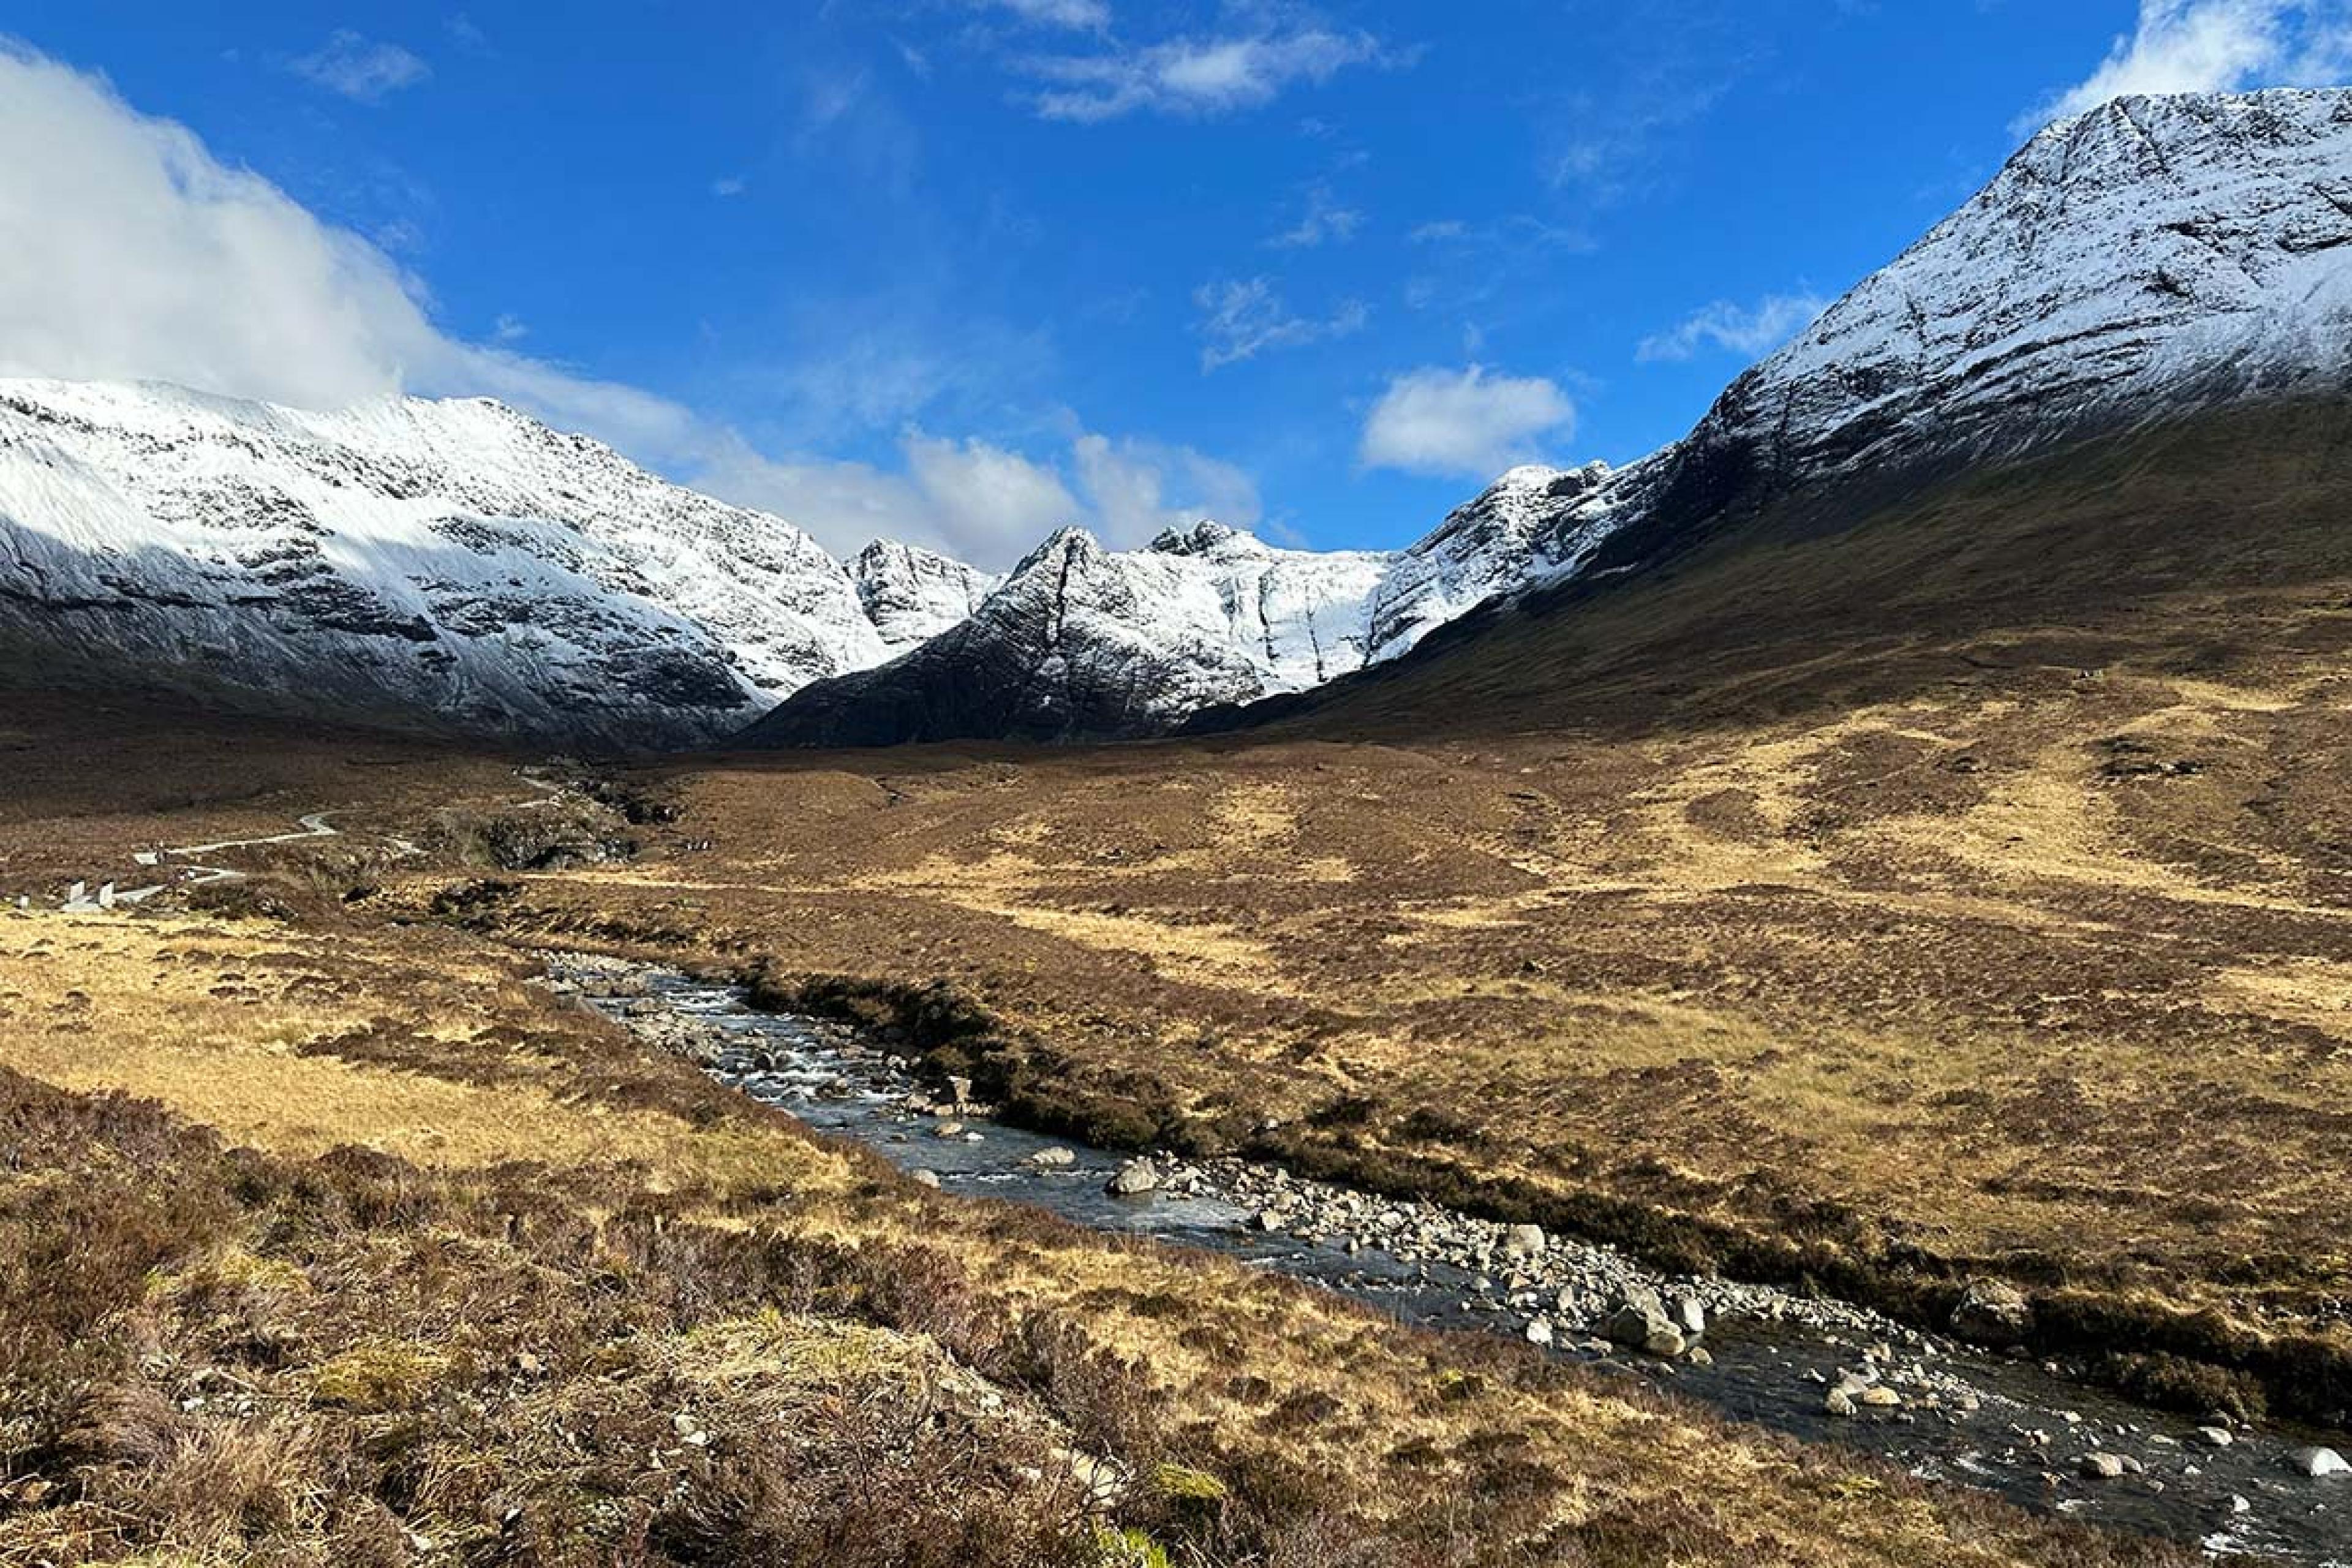 stream cutting through the golden landscape with snowy mountains in the background